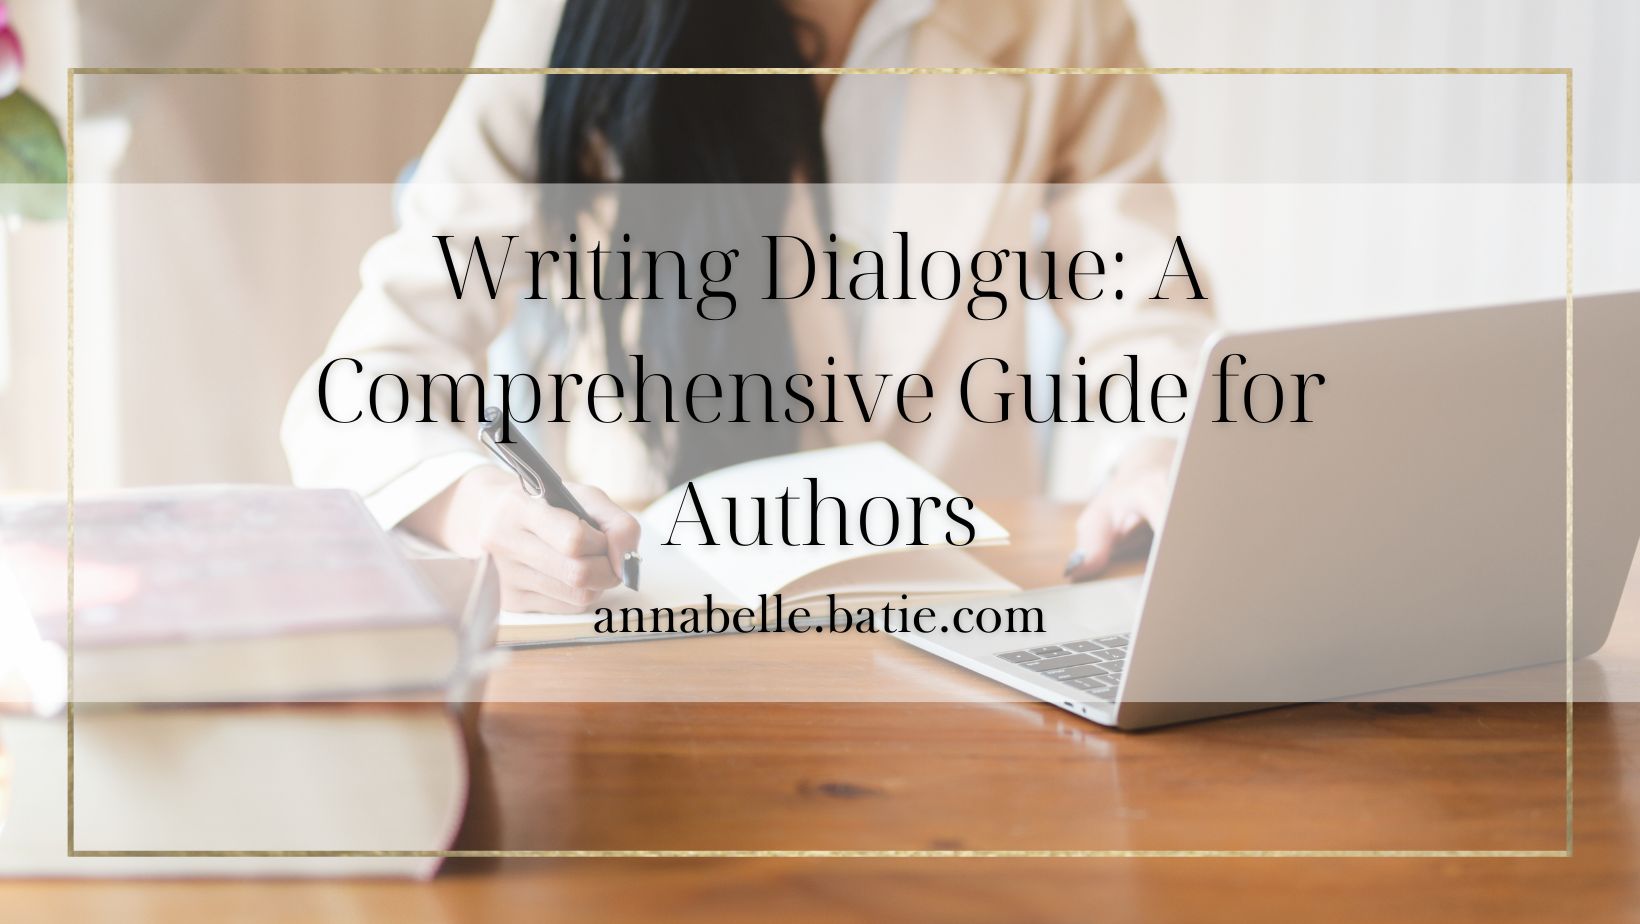 Writing Dialogue: A Comprehensive Guide for Authors